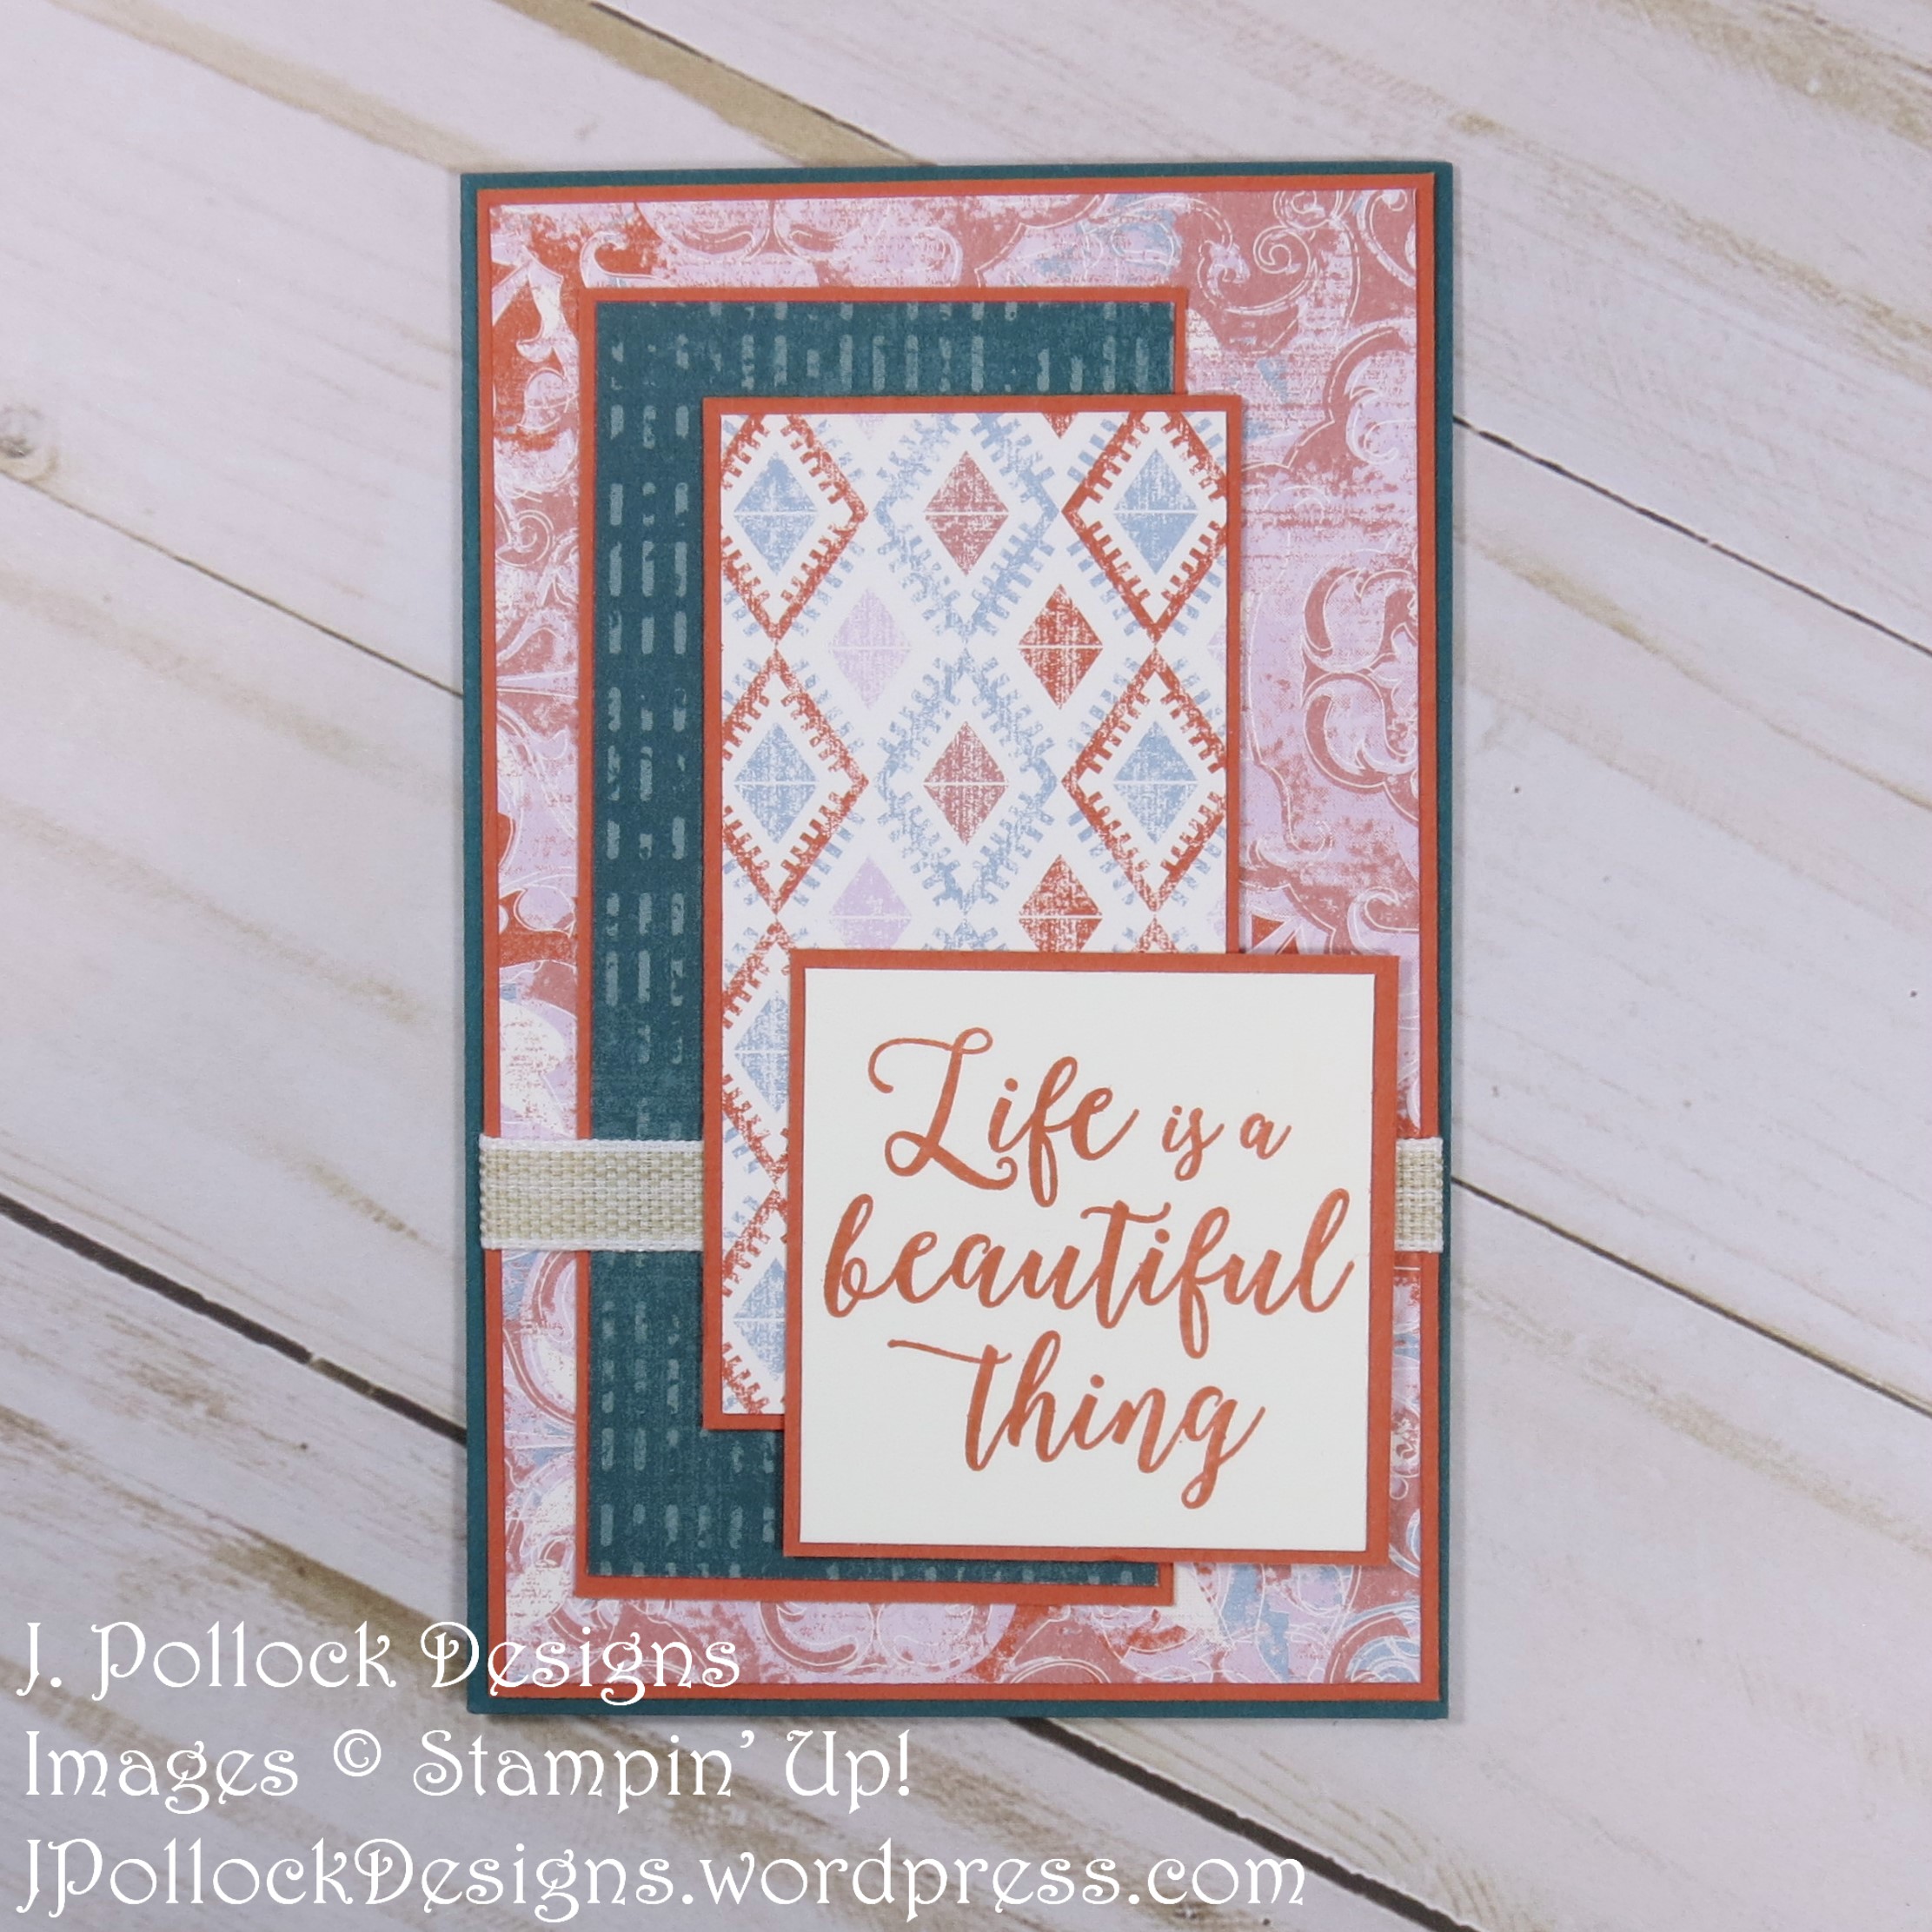 J. Pollock Designs - Stampin' Up! - Colorful Seasons, Woven Threads, Mojo Monday